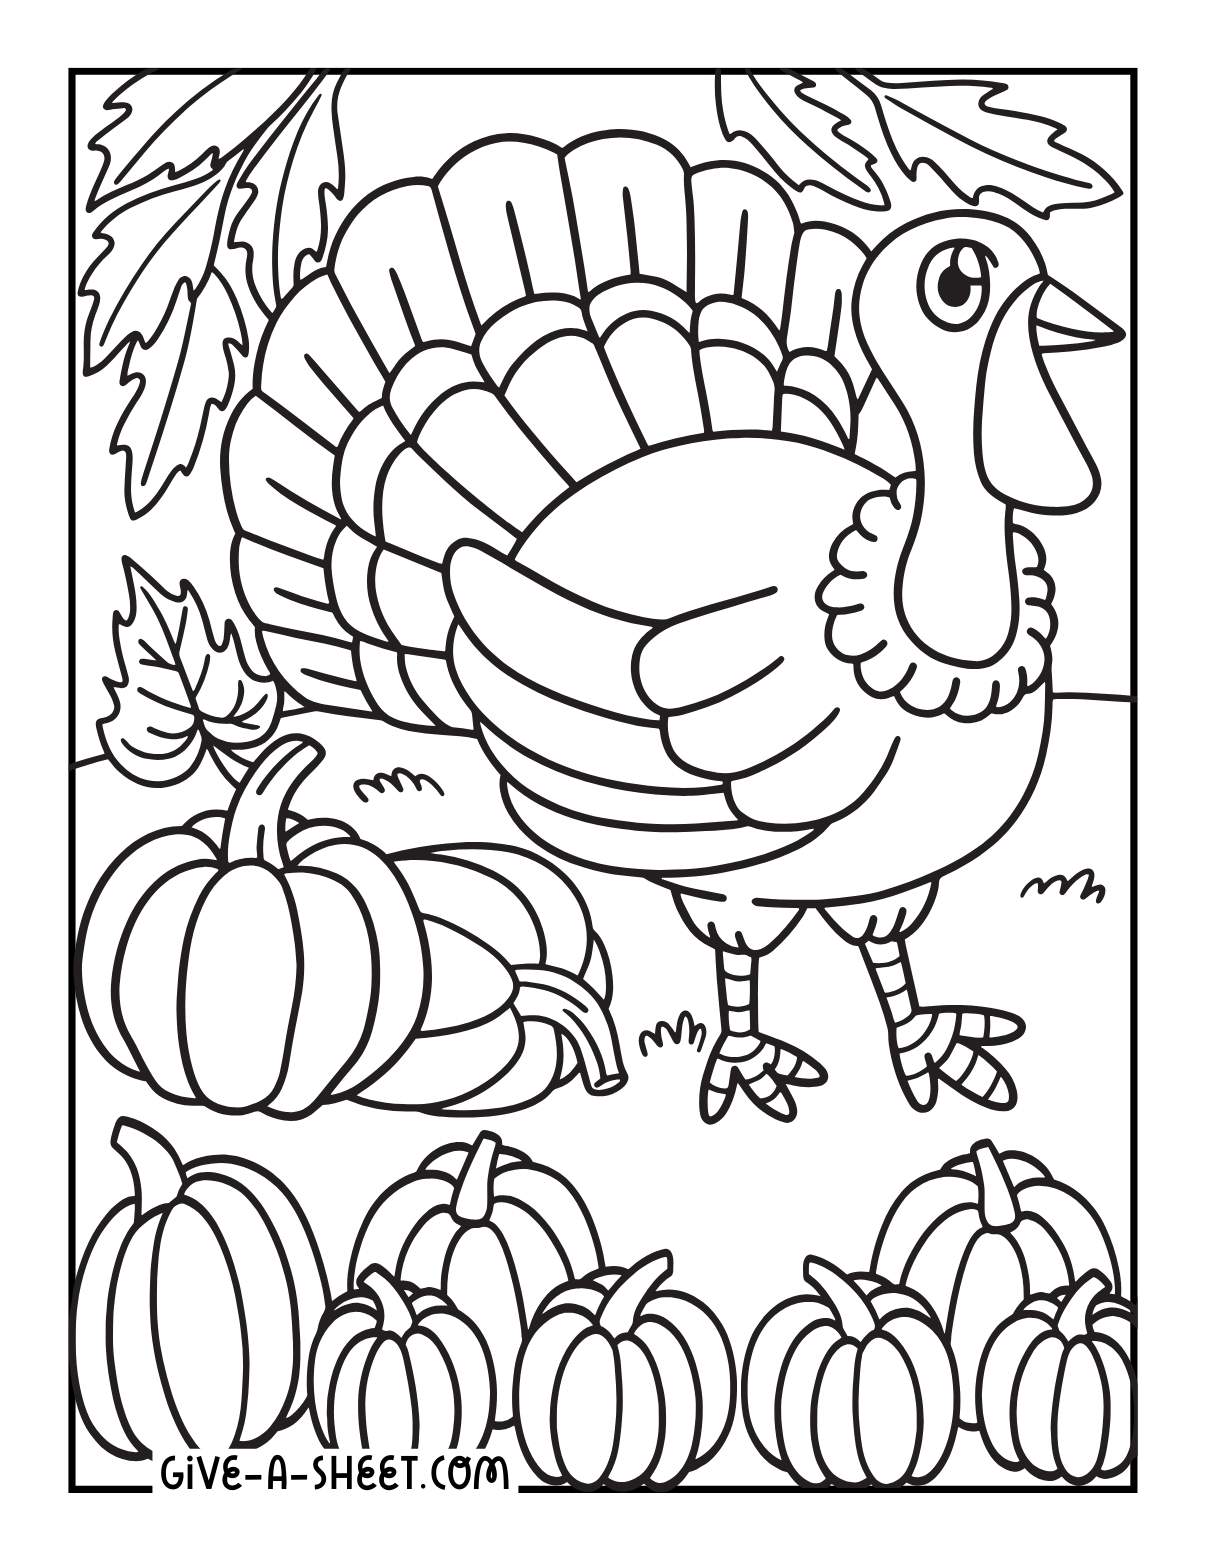 Cute thanksgiving turkey coloring pages for kids.